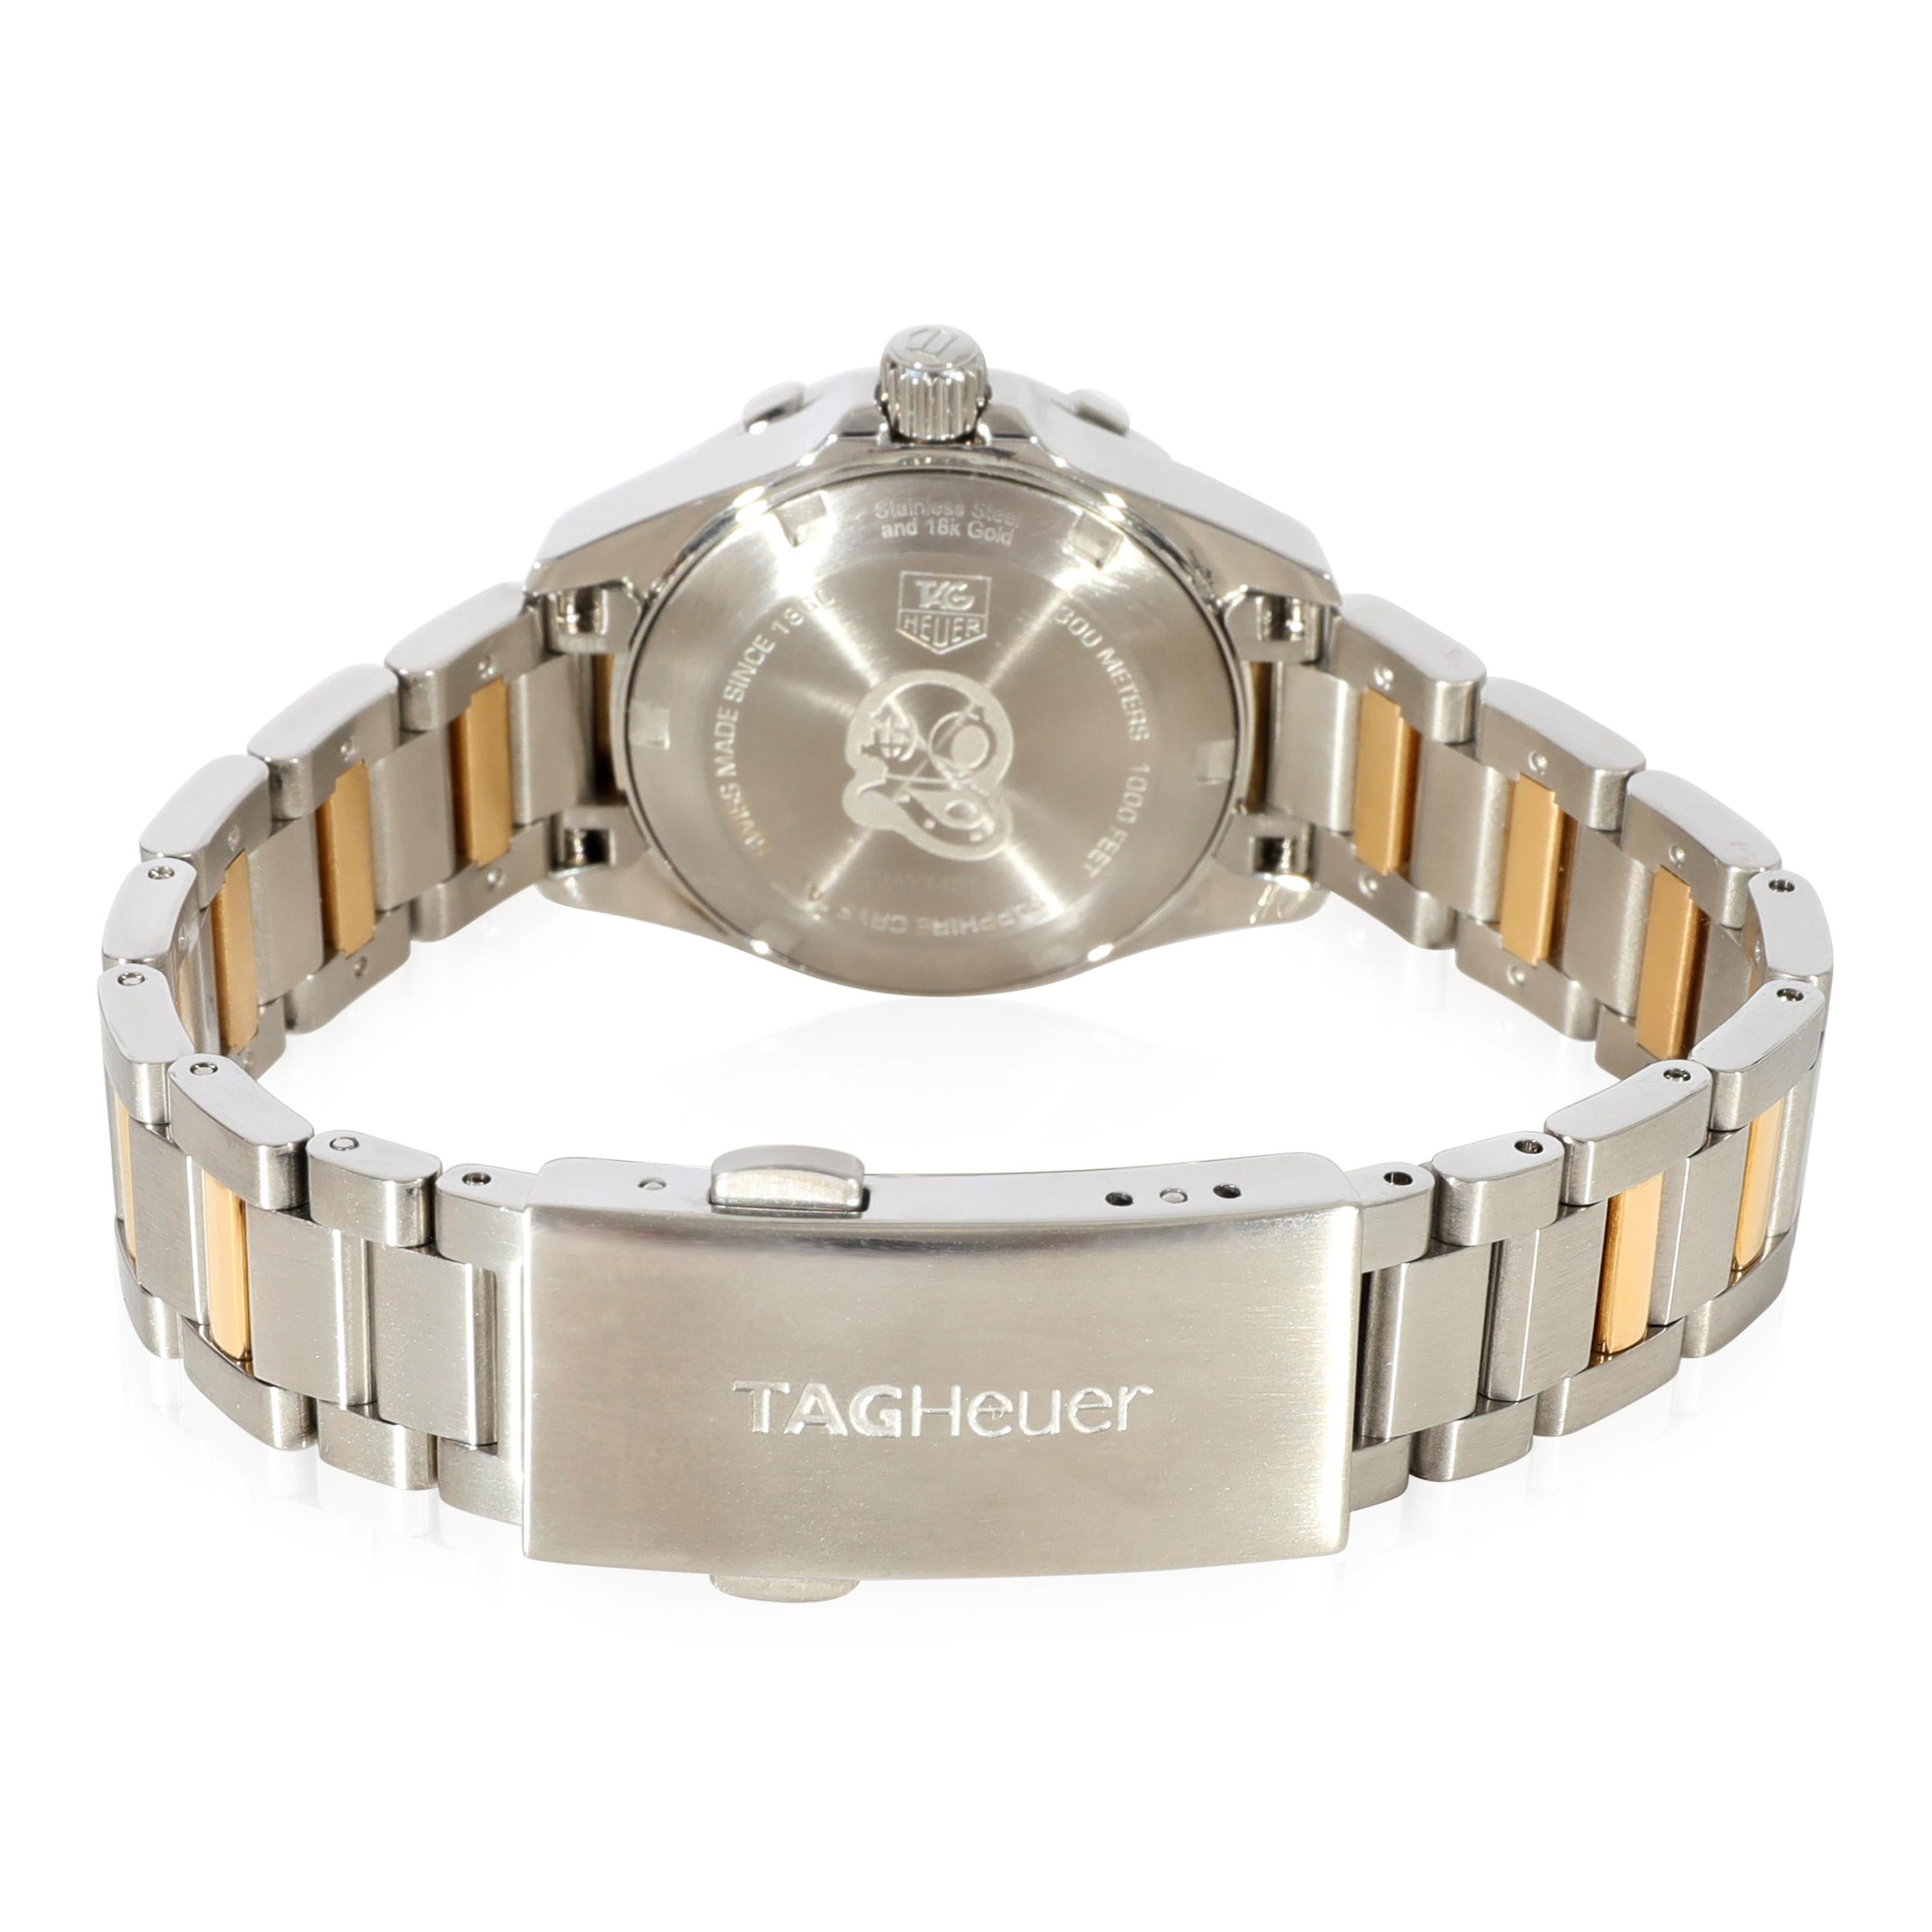 Tag Heuer Aquaracer WAY1451.BD0922 Women's Watch in  Stainless Steel/Yellow Gold

SKU: 125843

PRIMARY DETAILS
Brand: Tag Heuer
Model: Aquaracer
Country of Origin: Switzerland
Movement Type: Quartz: Battery
Year of Manufacture: 2010-2019
Condition: